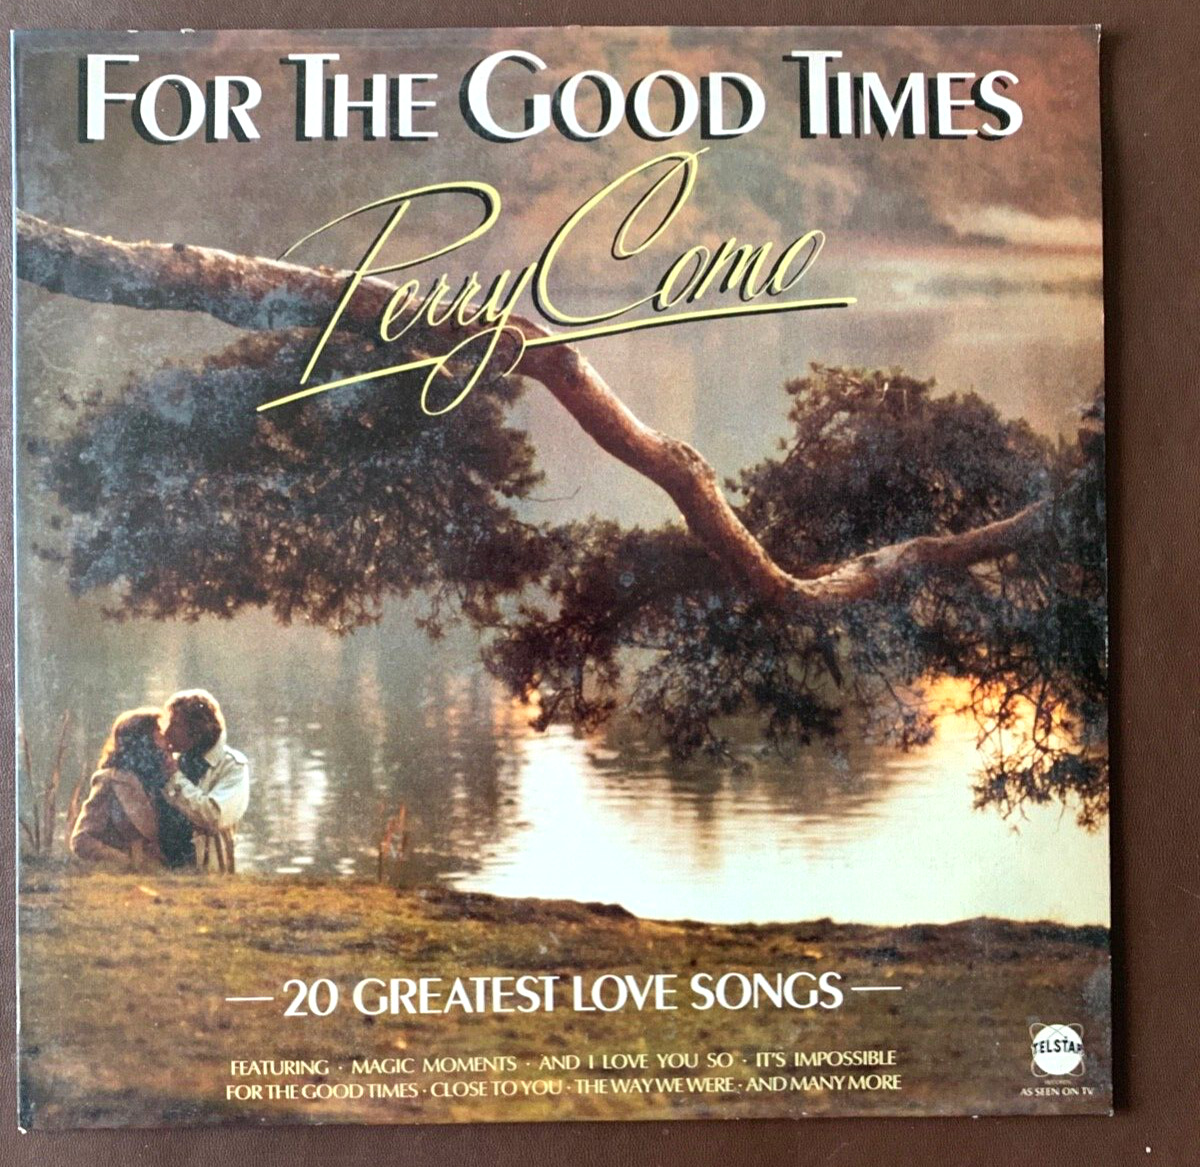 For The Good Times - Perry Como - Vinyl LP  33rpm